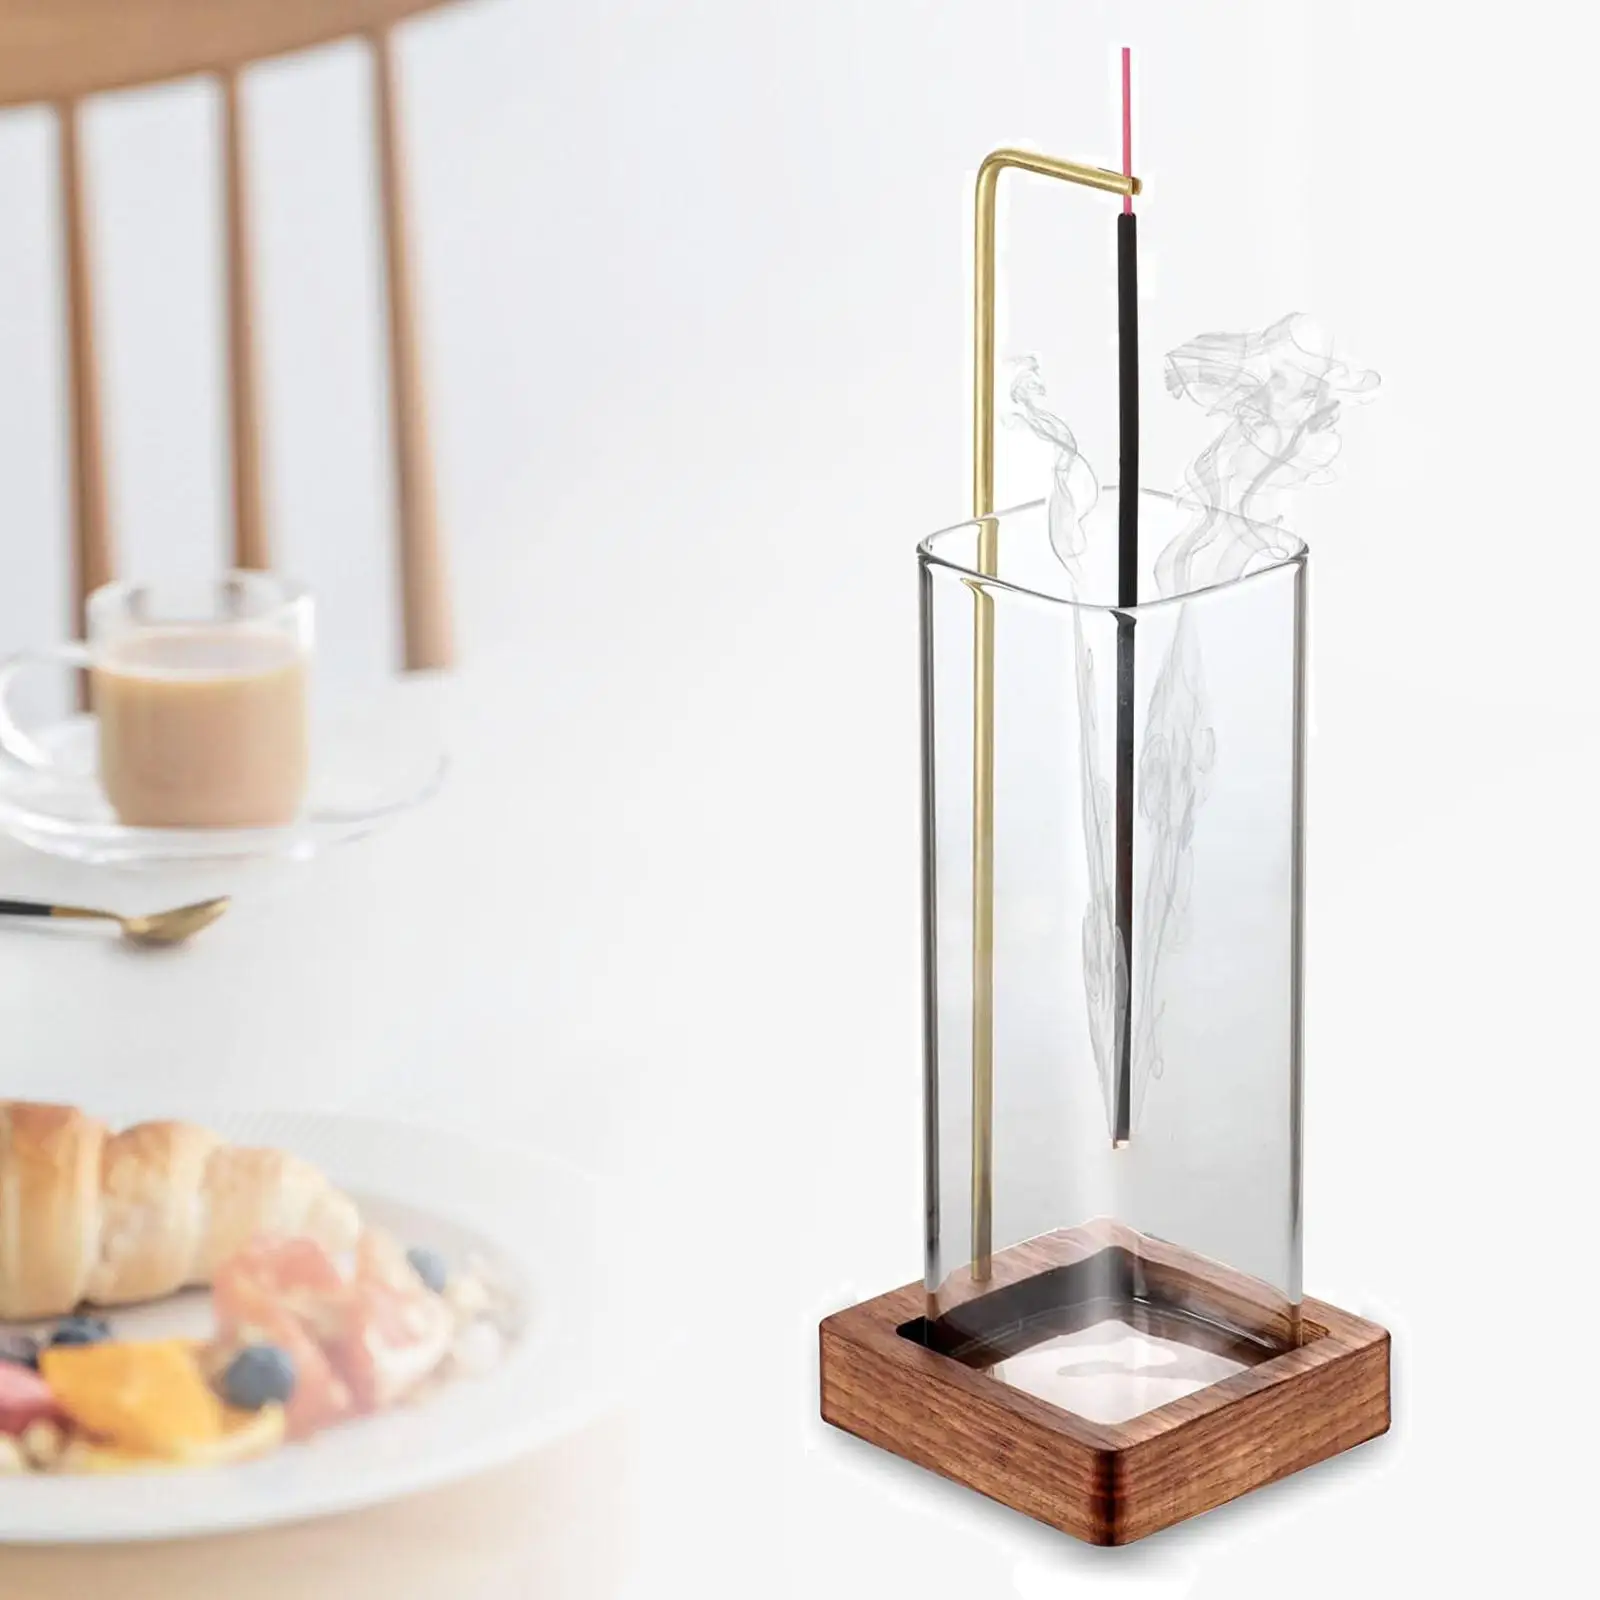 Incense Holder for Sticks Anti Ash Flying with Glass Ash Catcher Handmade Incense Tray for Tea House Table SPA Office